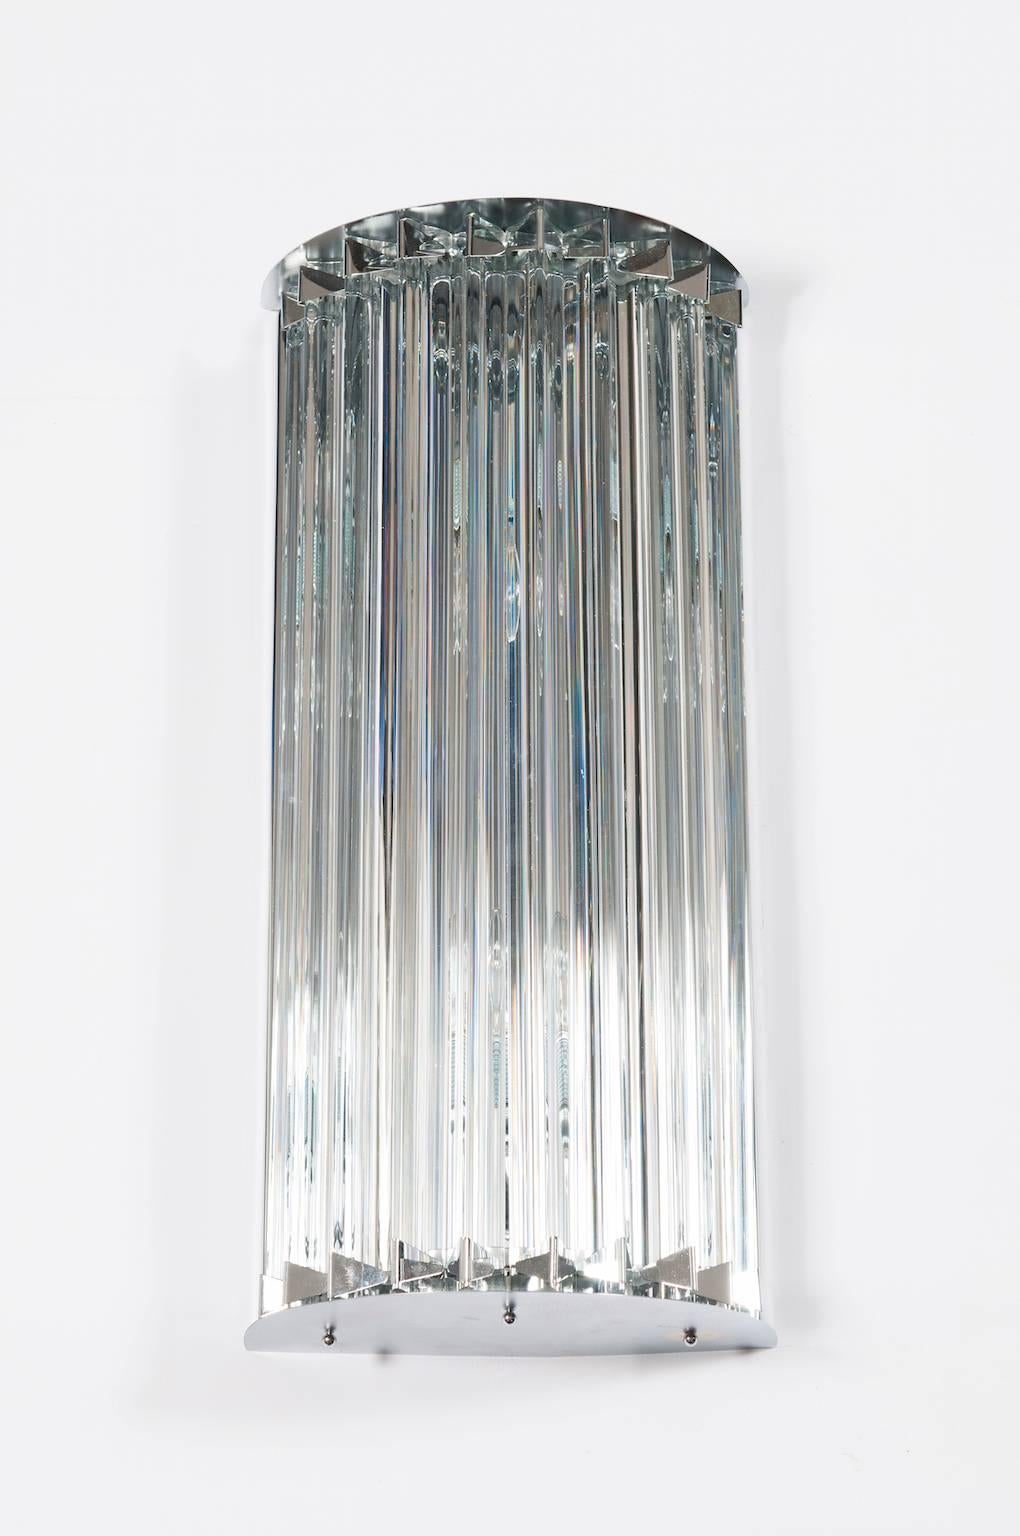 Italian Venetian Murano glass wall sconce, in very excellent original condition attributed to Venini, circa 1960s, composed by transparent glass triedro elements, with an original chrome frame. The sconces are 23.62 inches high, 5.91 inches deep by